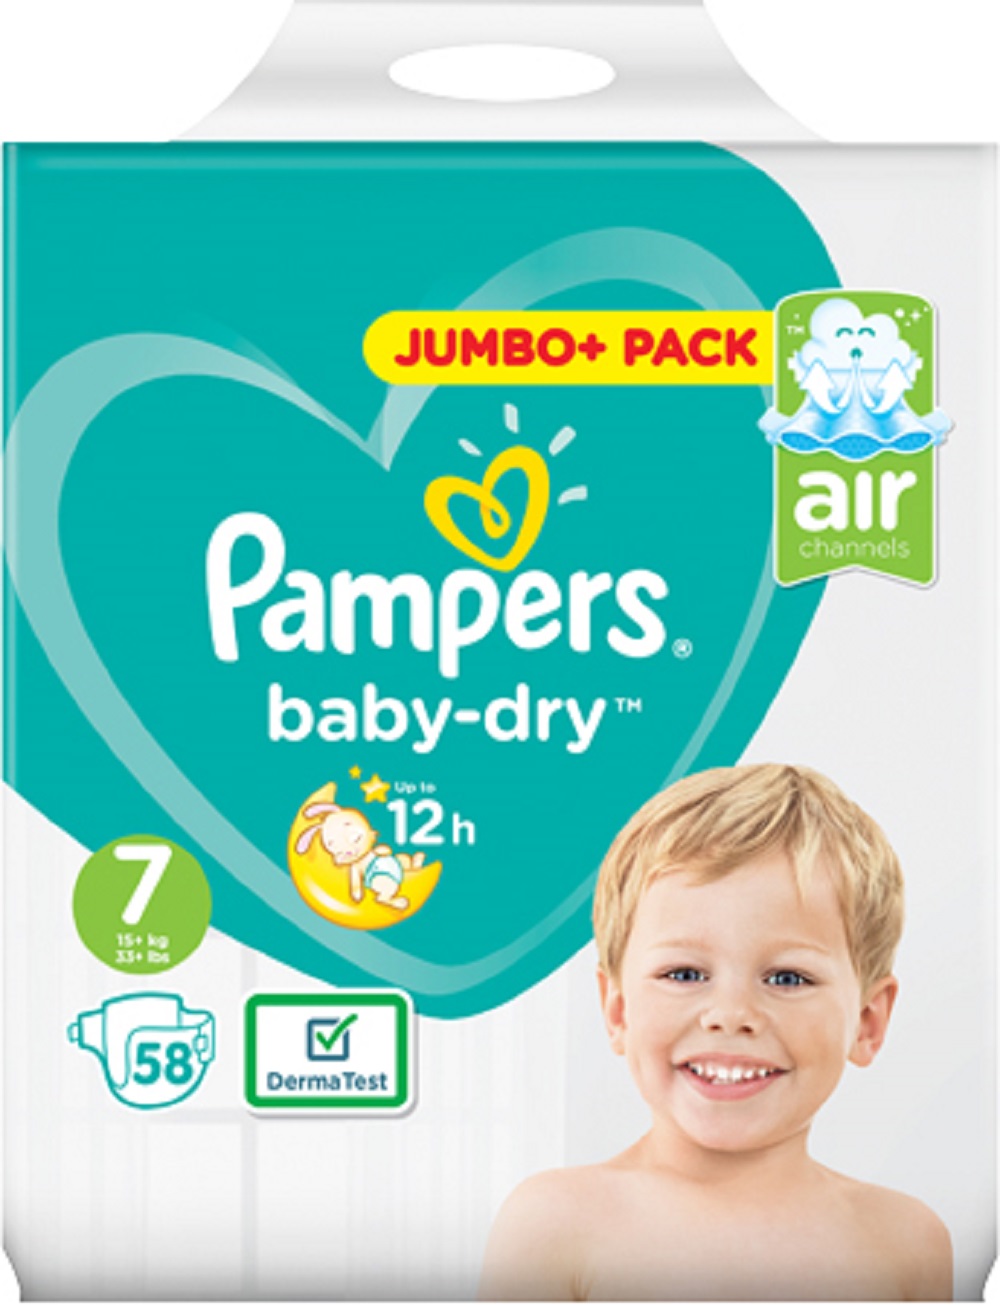 Pampers Baby Dry Size 7 Jumbo Pack 58